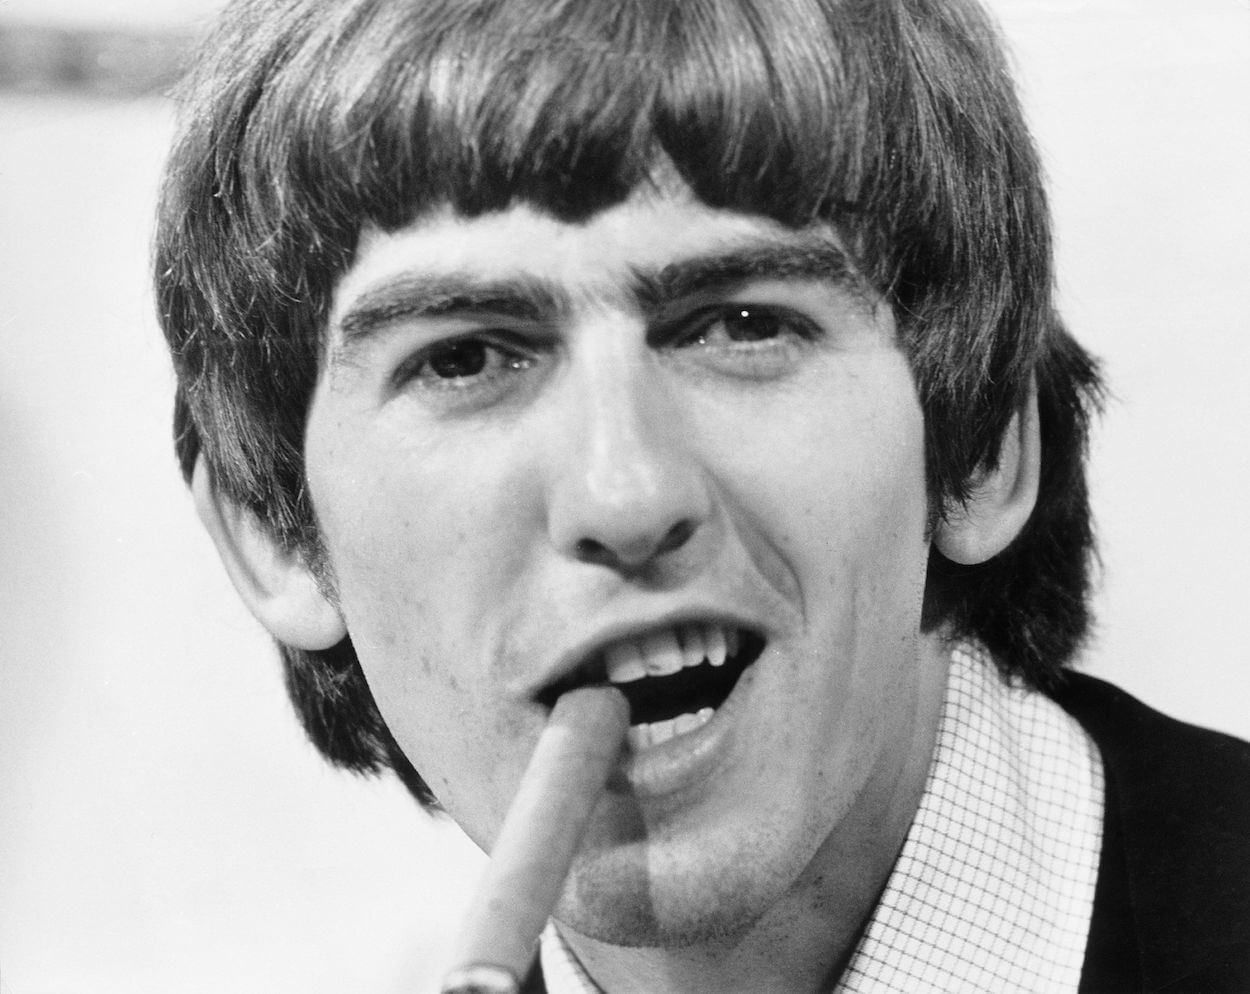 George Harrison chomping on a cigar and grinning on his 21st birthday in 1964.